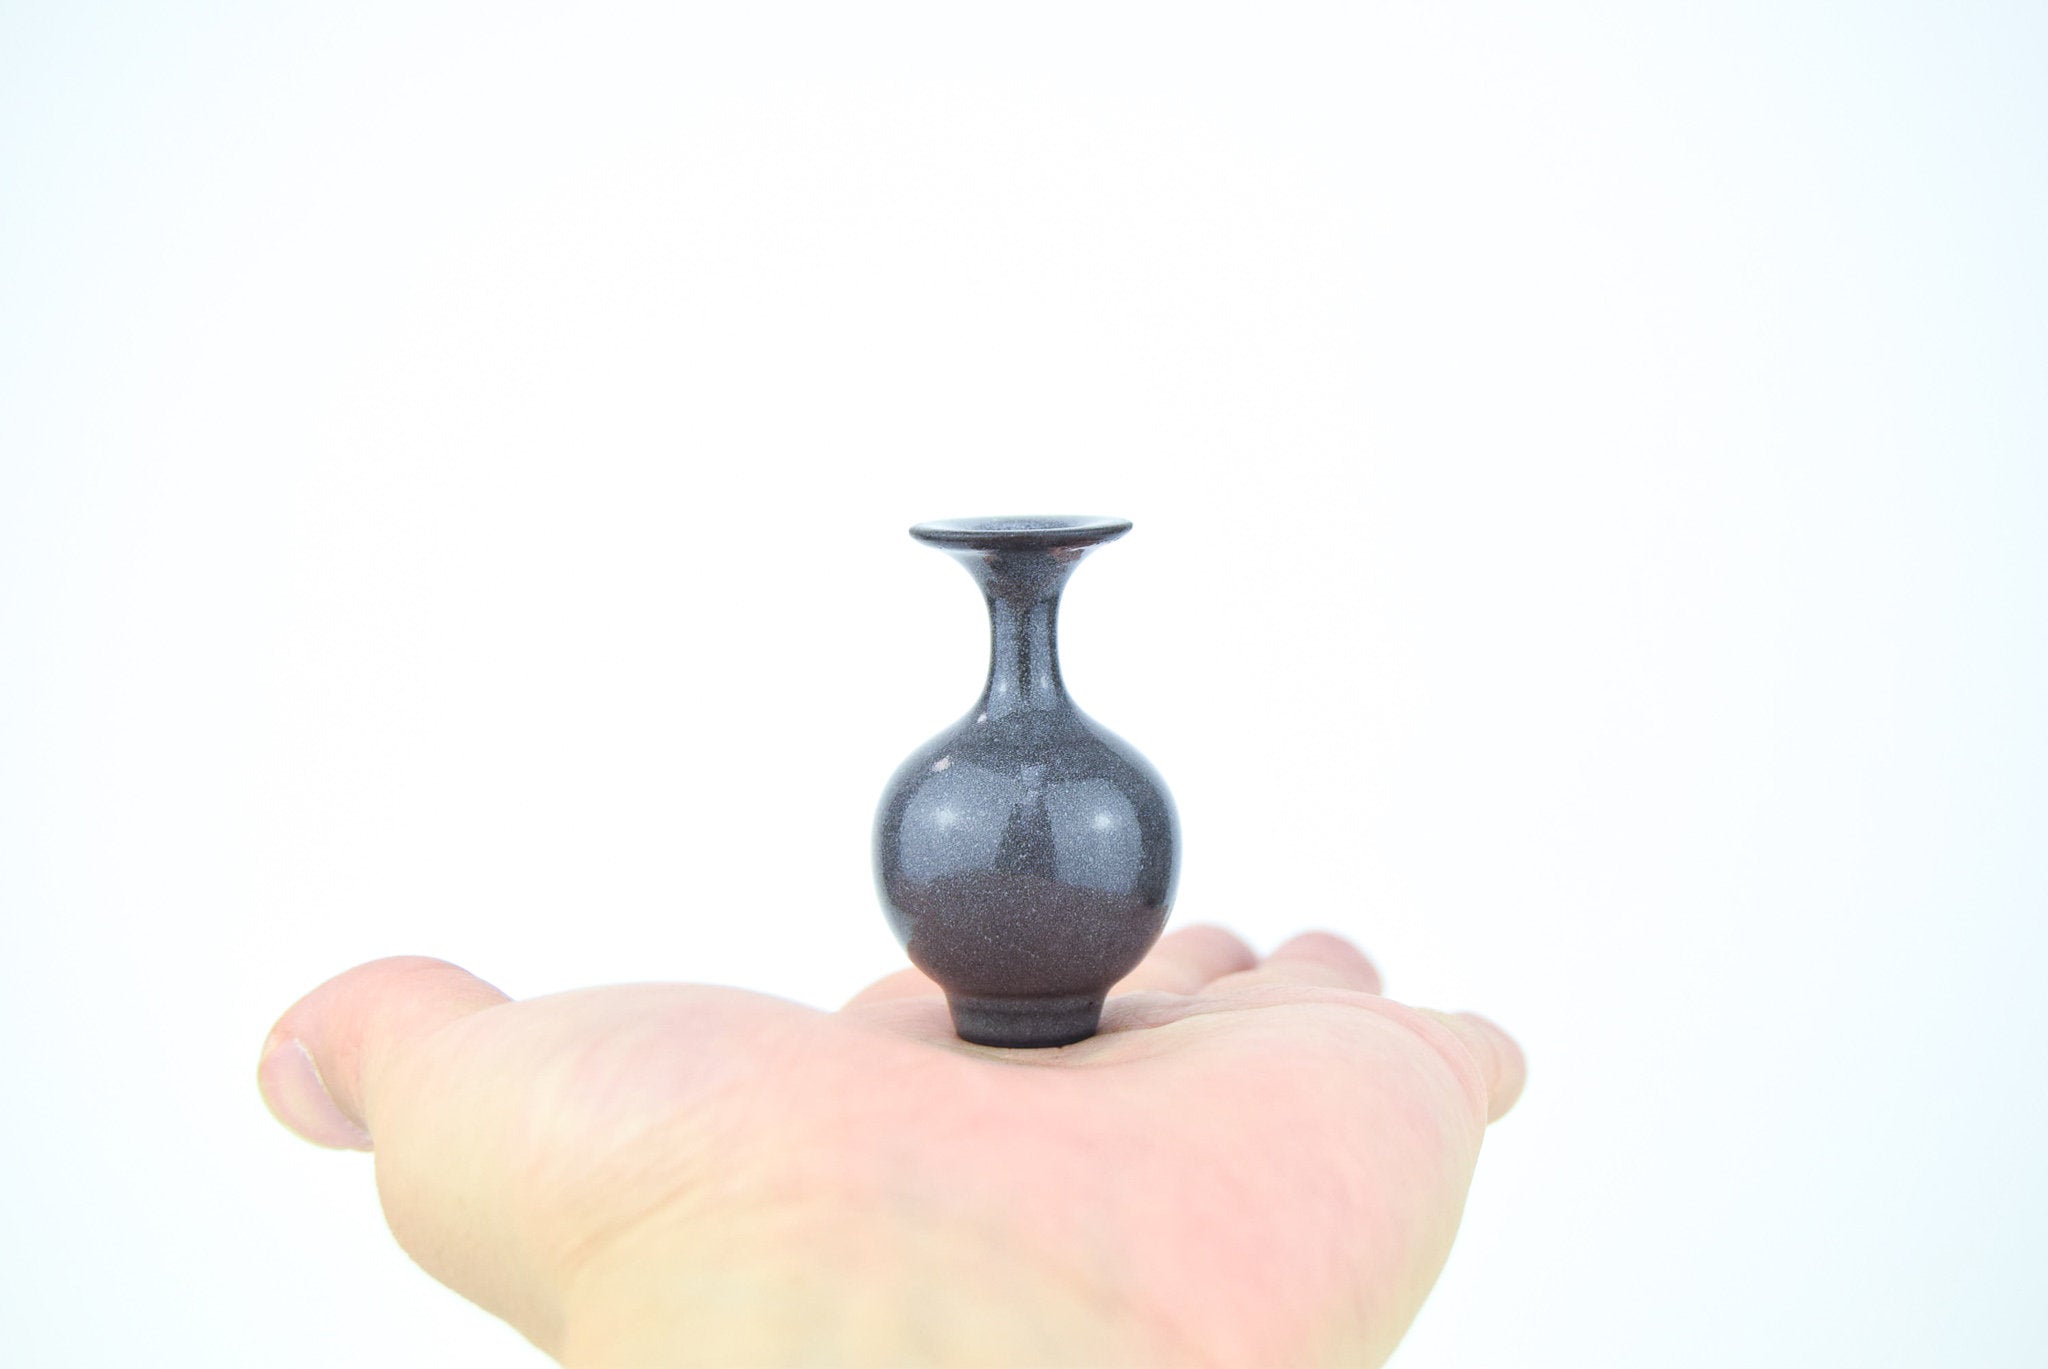 A tiny exquisite ceramic vase sat on the maker's hand.